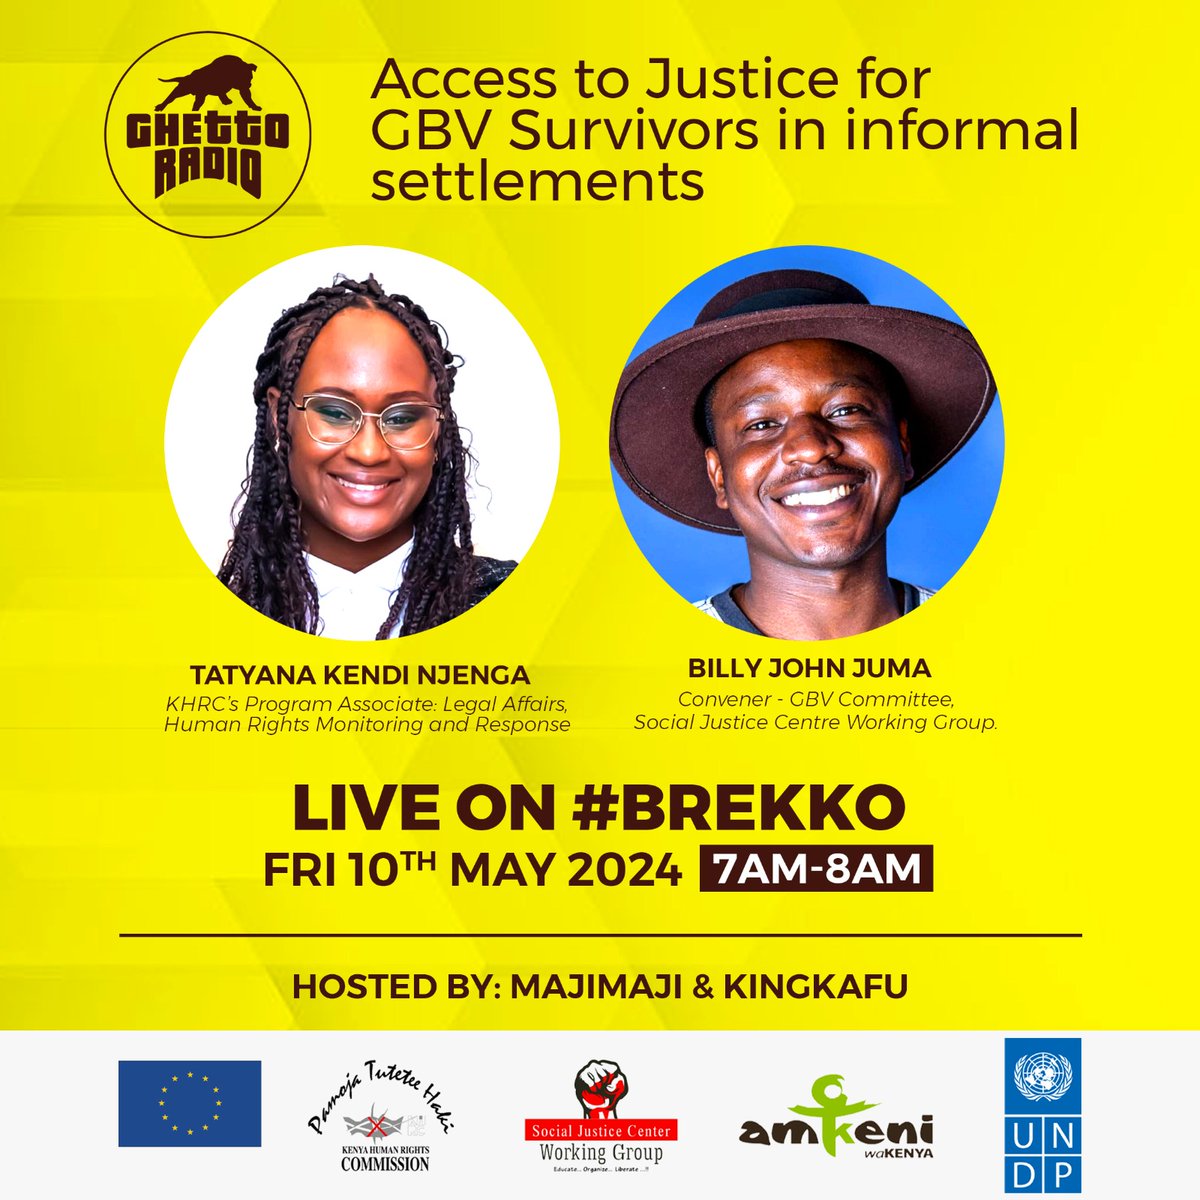 Gender-based violence (GBV) survivors especially in the informal settlements face numerous challenges in seeking justice. Want to know how you can access justice? Tune in live on #Brekko this morning. @GhettoRadio895